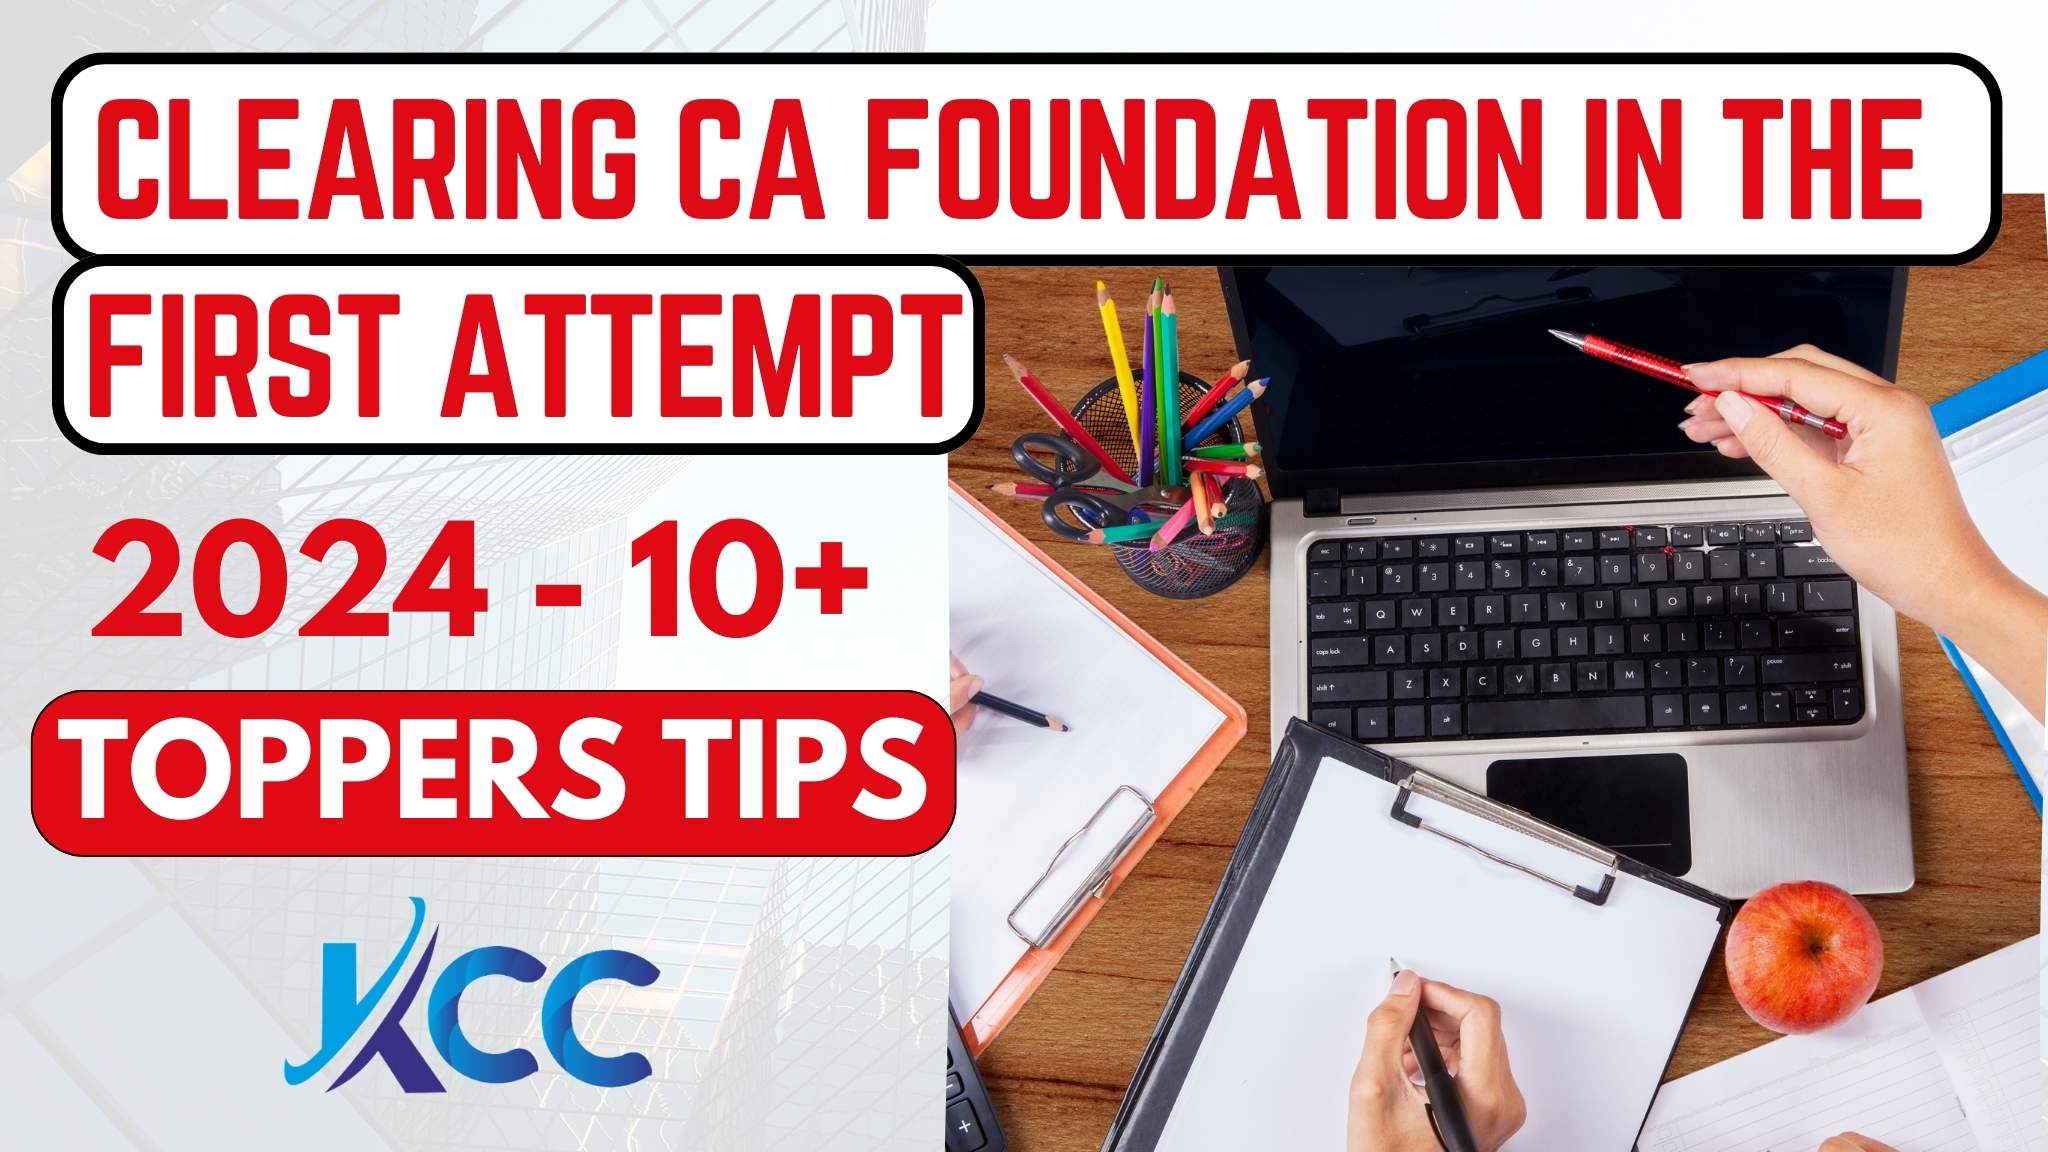 KCC Tutorials by Jagdeep Arora Sir provide you the best toppers tips to pass CA Foundation 2024 in the first attempt.